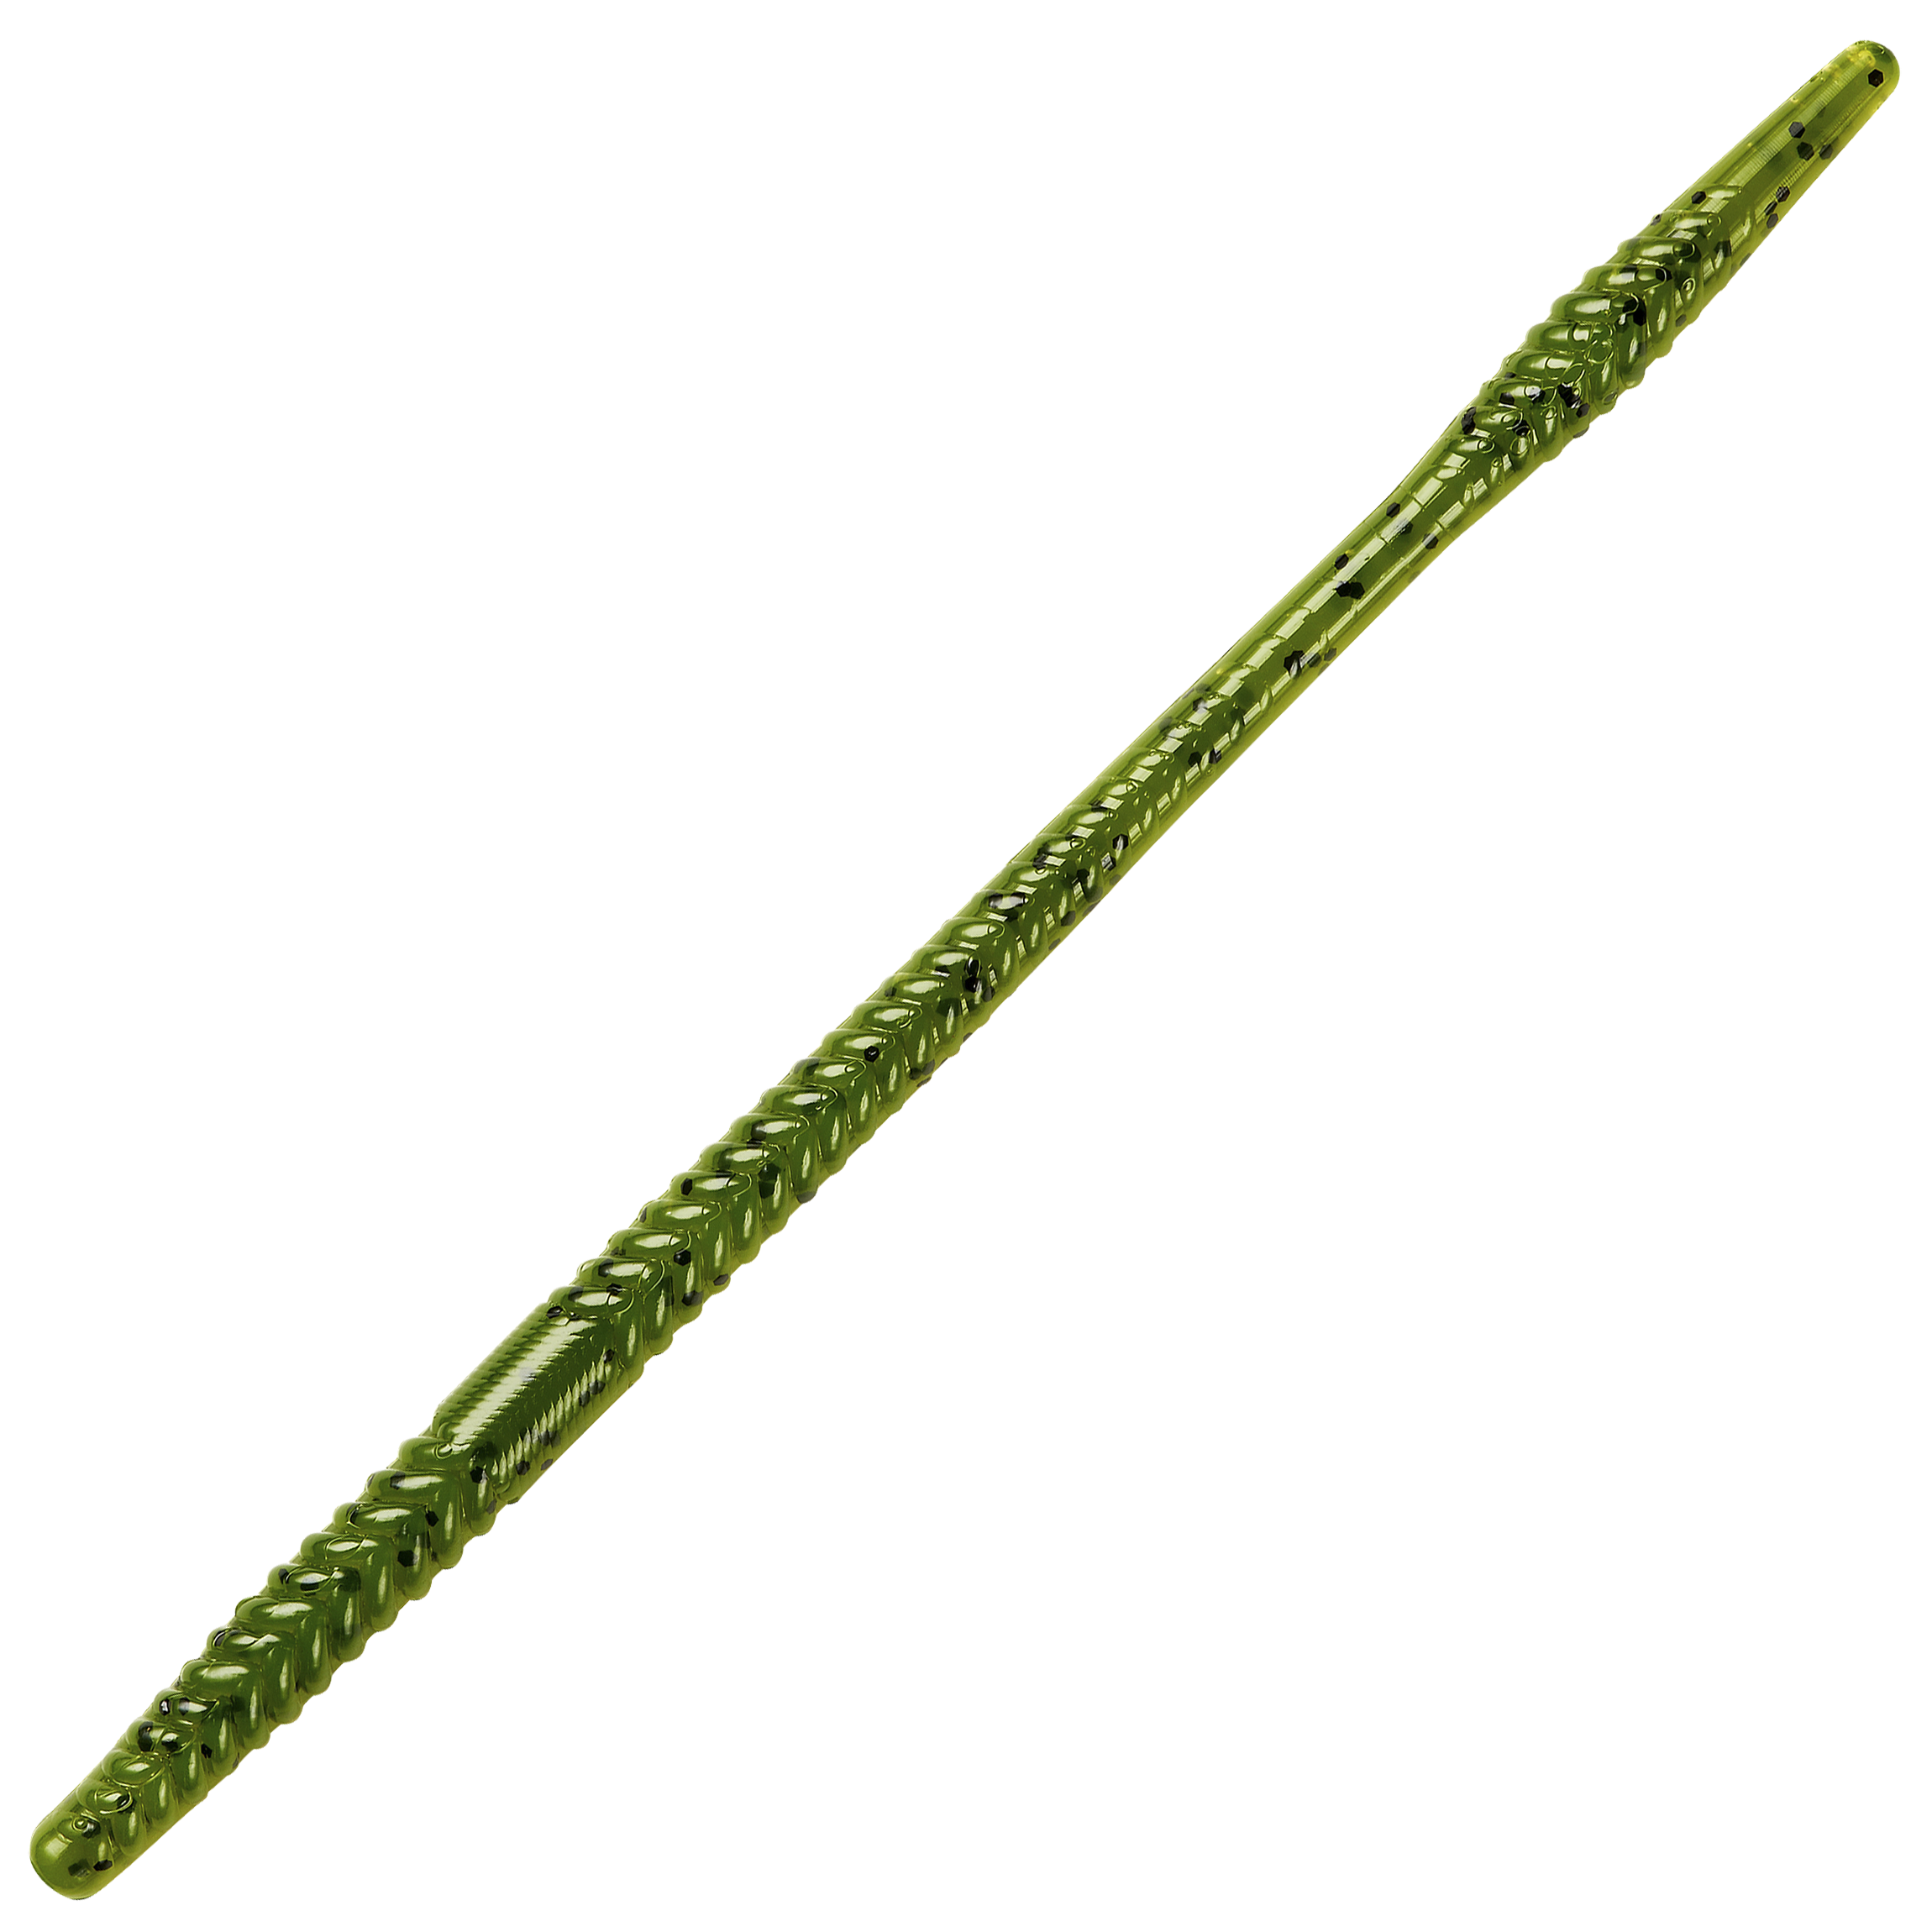 YUM Finesse Worm - Watermelon Seed - 6'